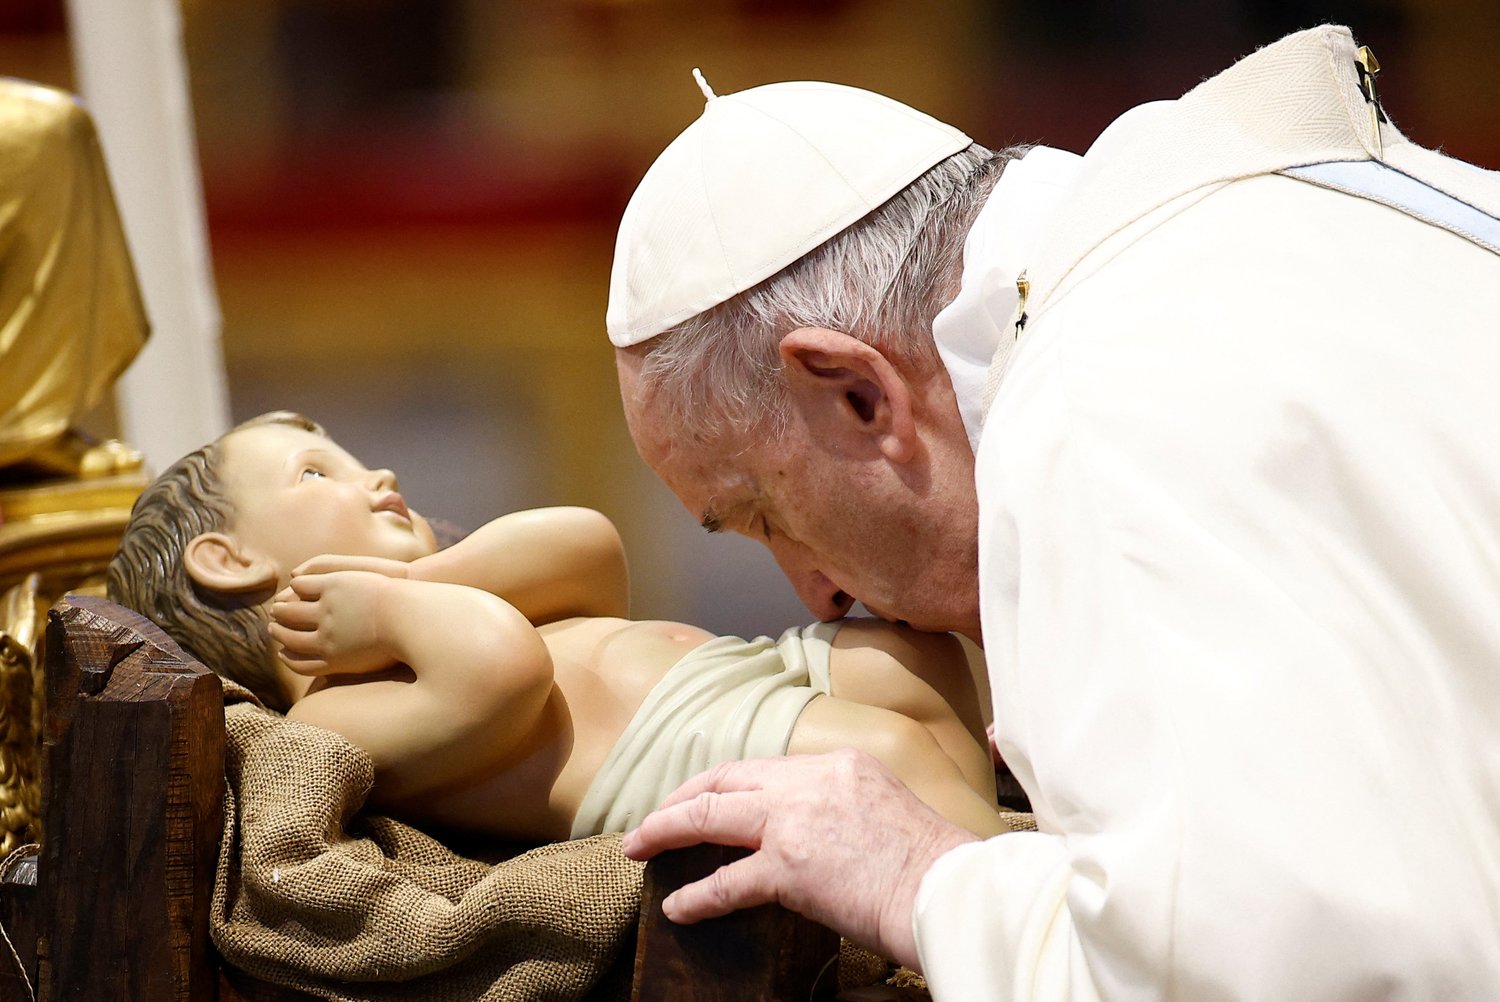 Pope Francis kisses a figurine of the Baby Jesus as he arrives to celebrate Mass marking the feast of Mary, Mother of God, in St. Peter’s Basilica at the Vatican Jan. 1.